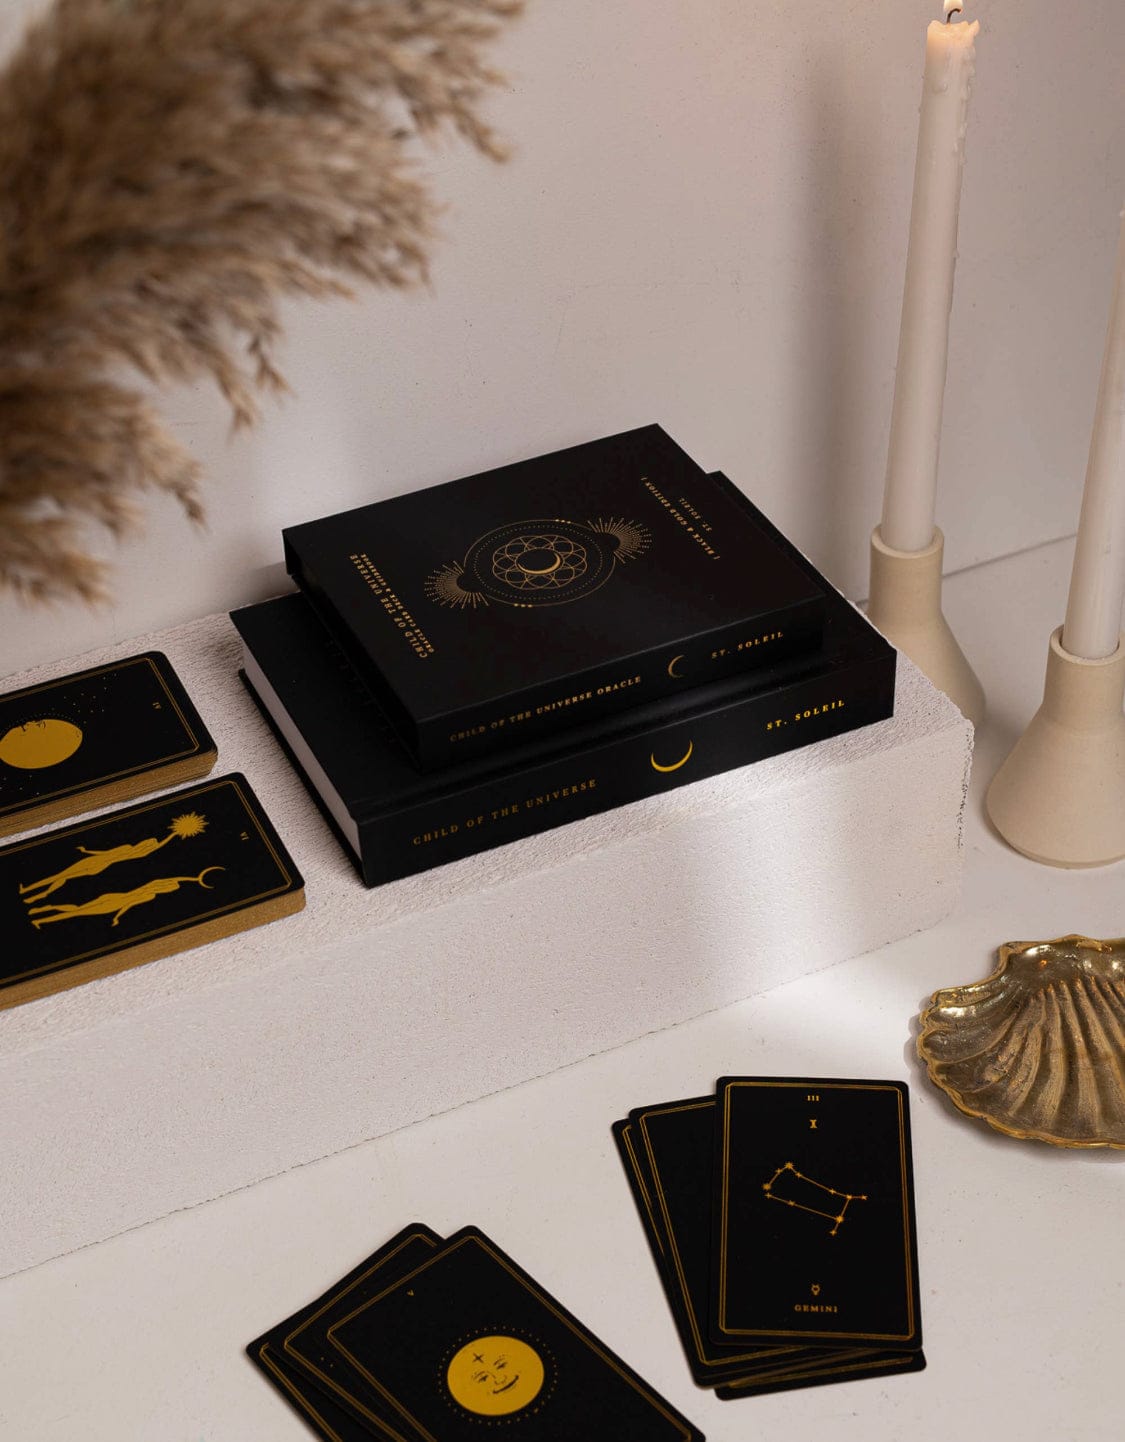 Child Of The Universe Oracle Deck - Black & Gold